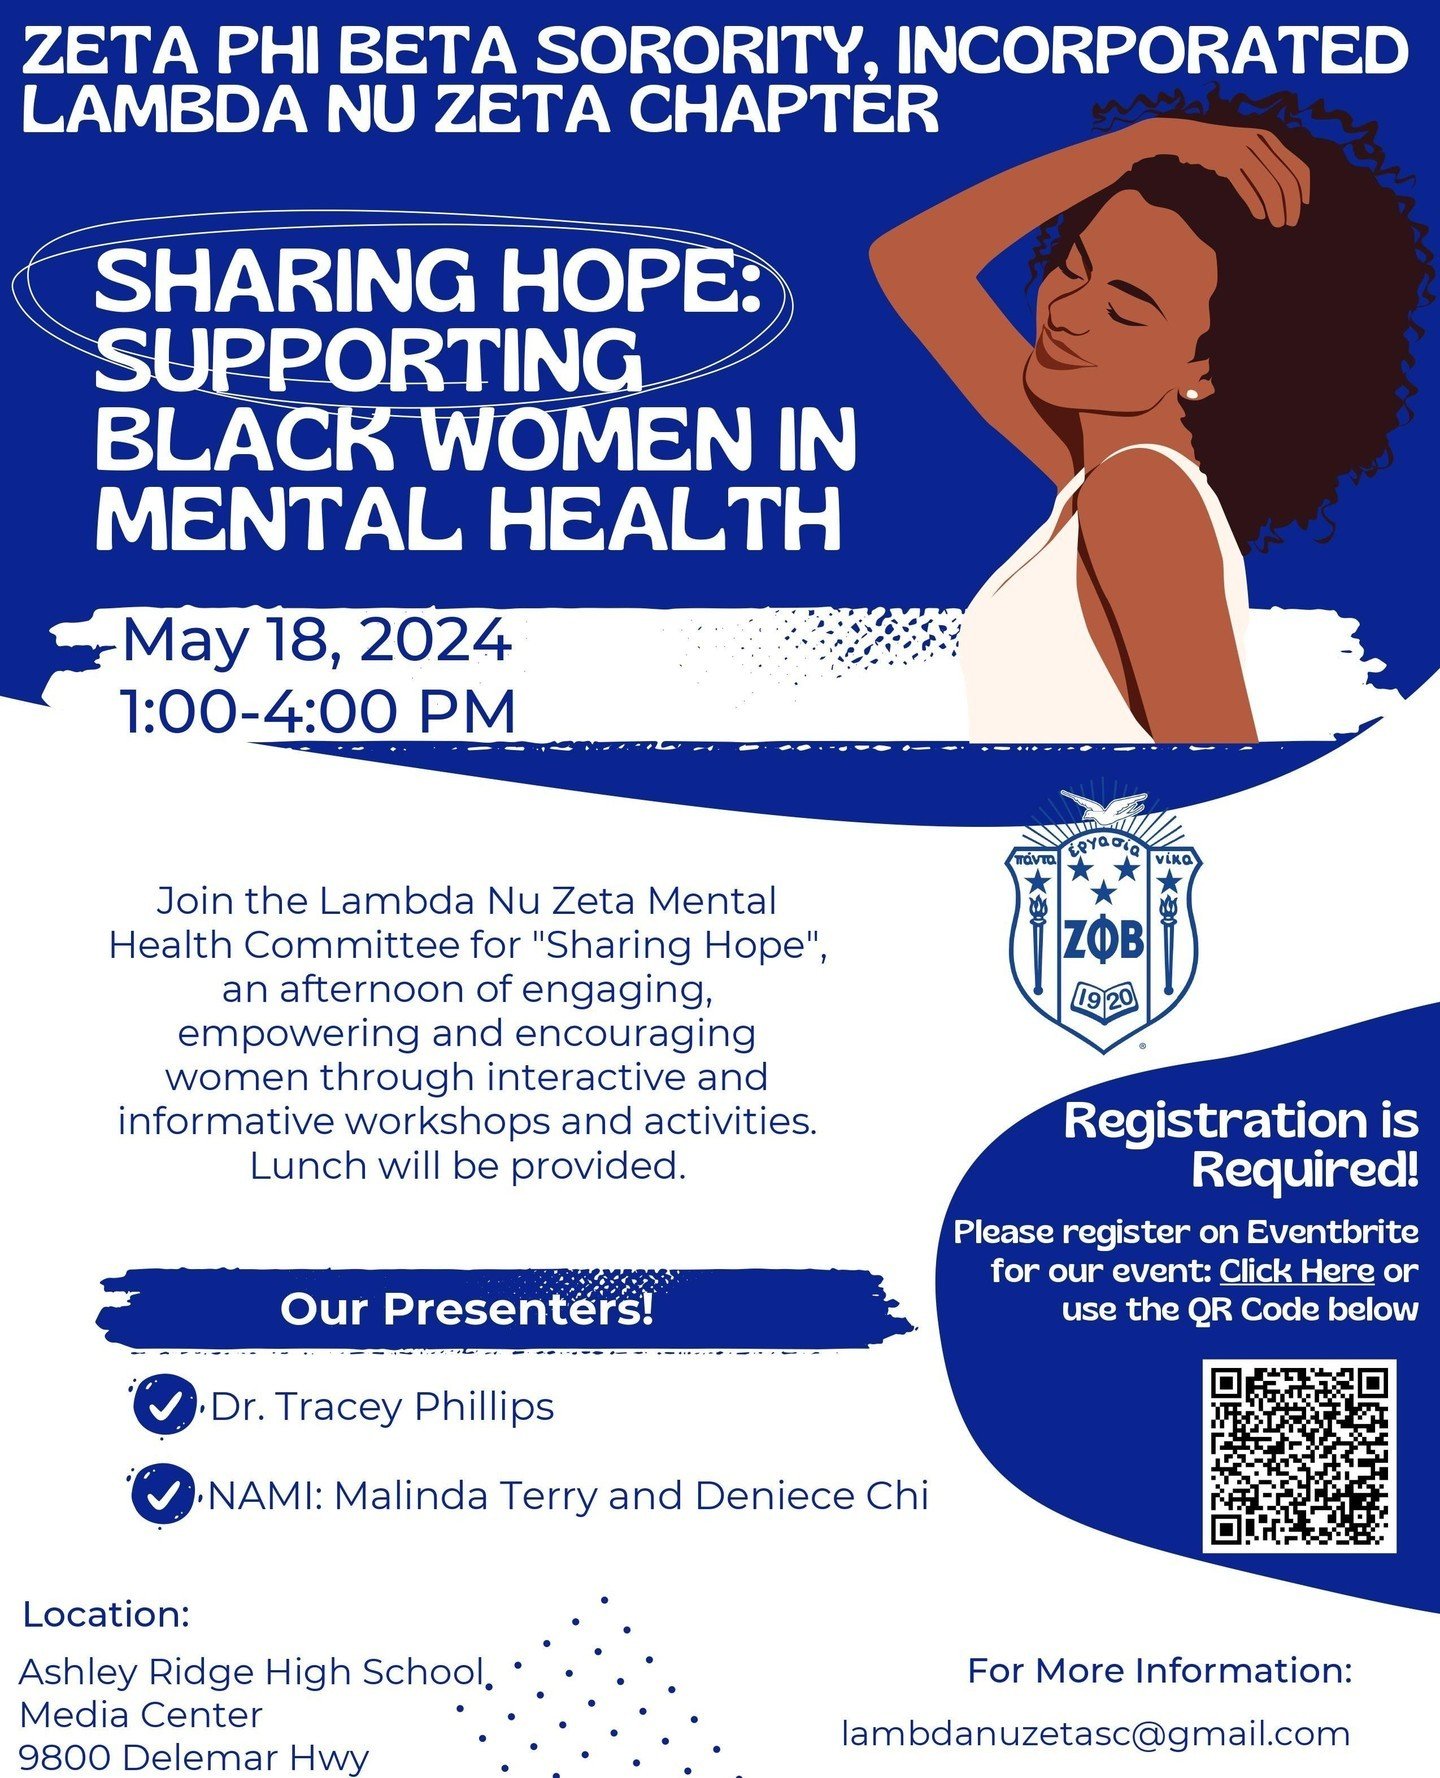 Join us for Sharing Hope: Supporting Black Women's Mental Health hosted by Zeta Phi Beta Sorority Inc, Lambda Nu Zeta Chapter!⁠
⁠
May 18th from 1-4pm⁠
Ashley Ridge High School Media Center 9800 Delemar Hwy Summerville, SC 29485⁠
⁠
We're excited to ha